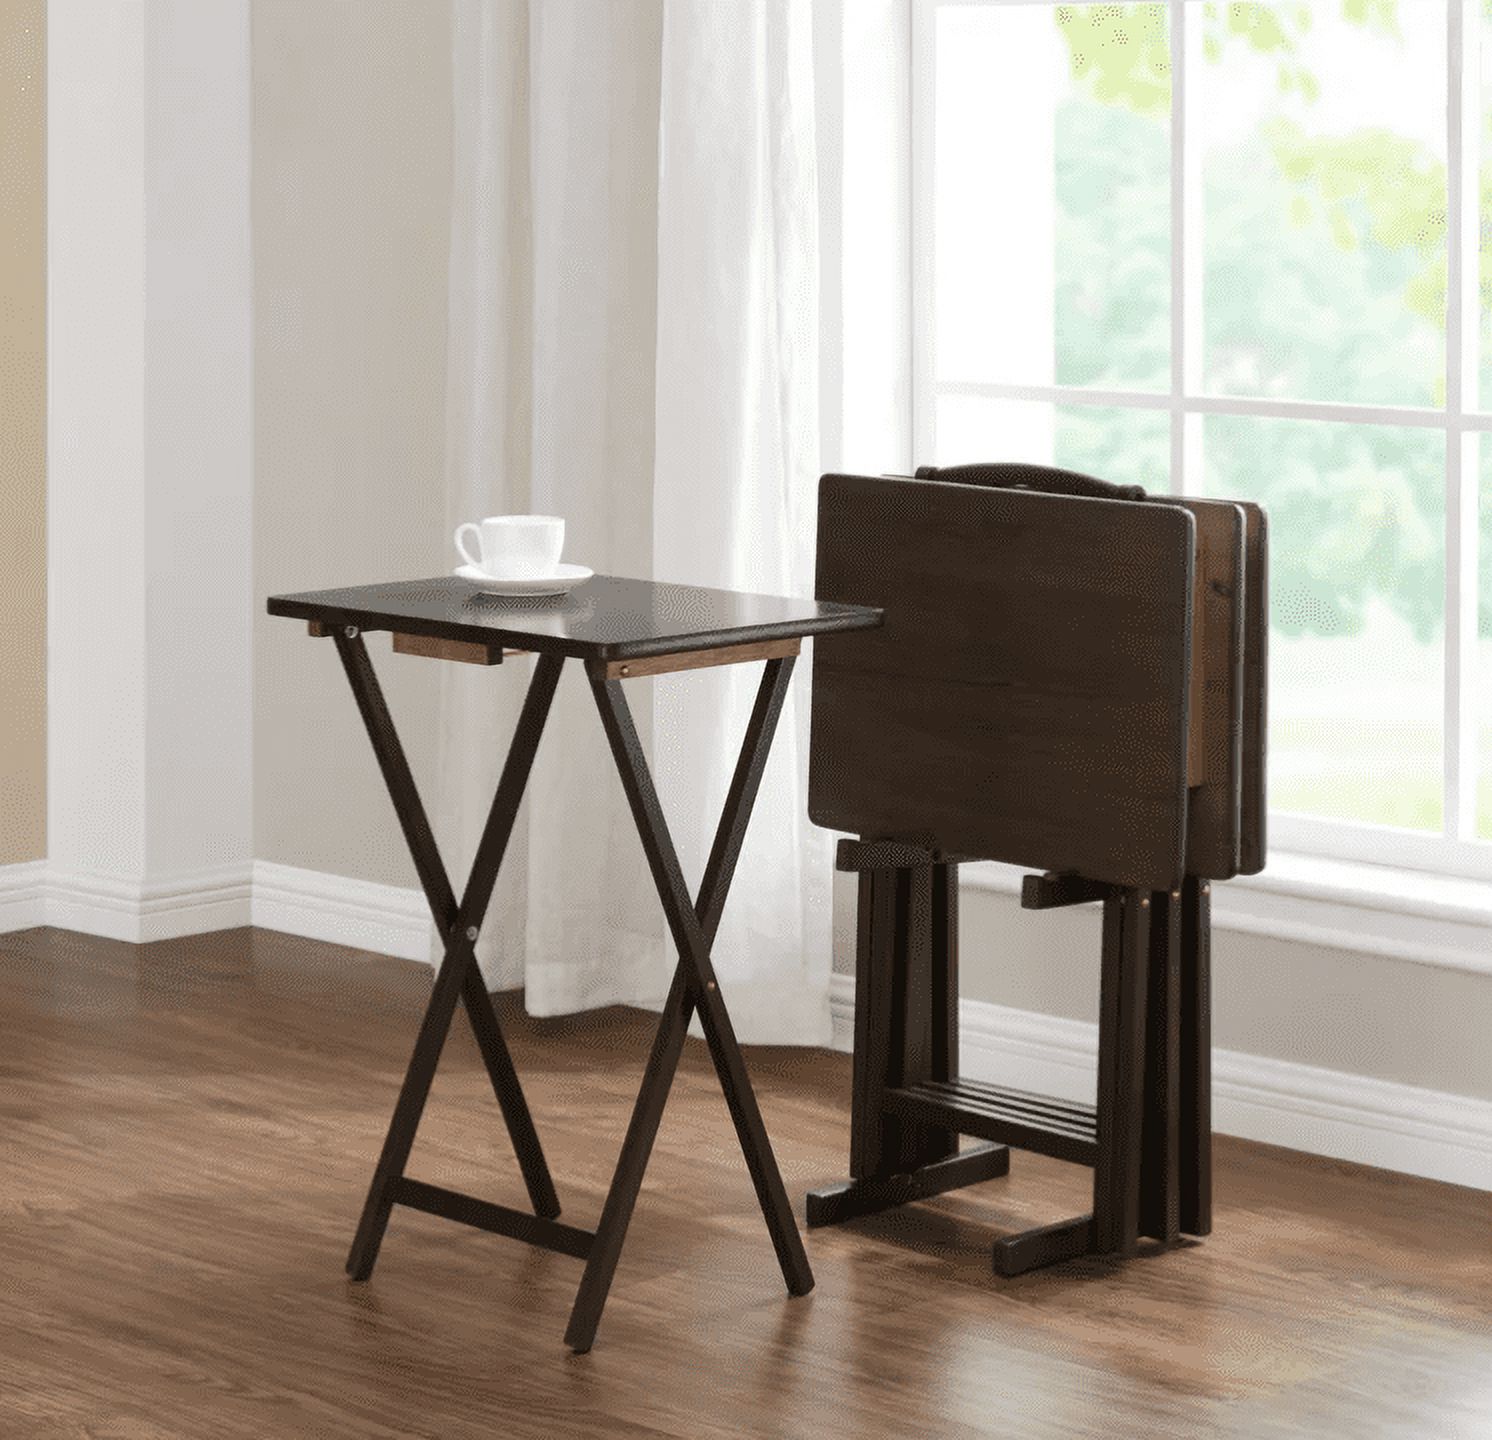 Mainstays Indoor Folding Table Set of 4 in Walnut L19 x W15 x H26 inches. 4 Tables+1 Rack Stand. - image 3 of 5